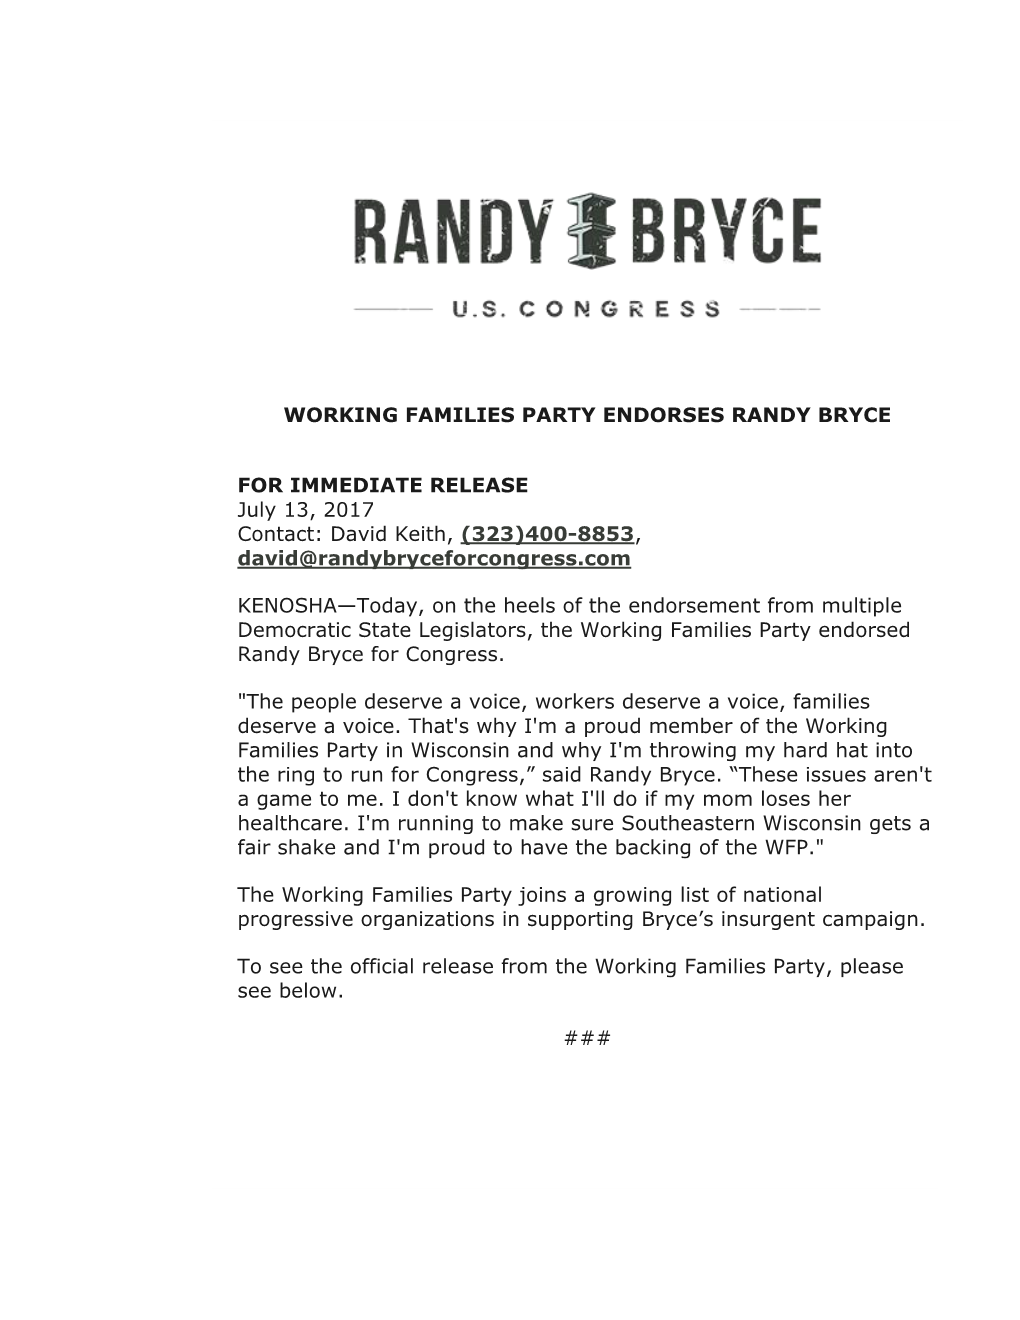 Working Families Party Endorses Randy Bryce For